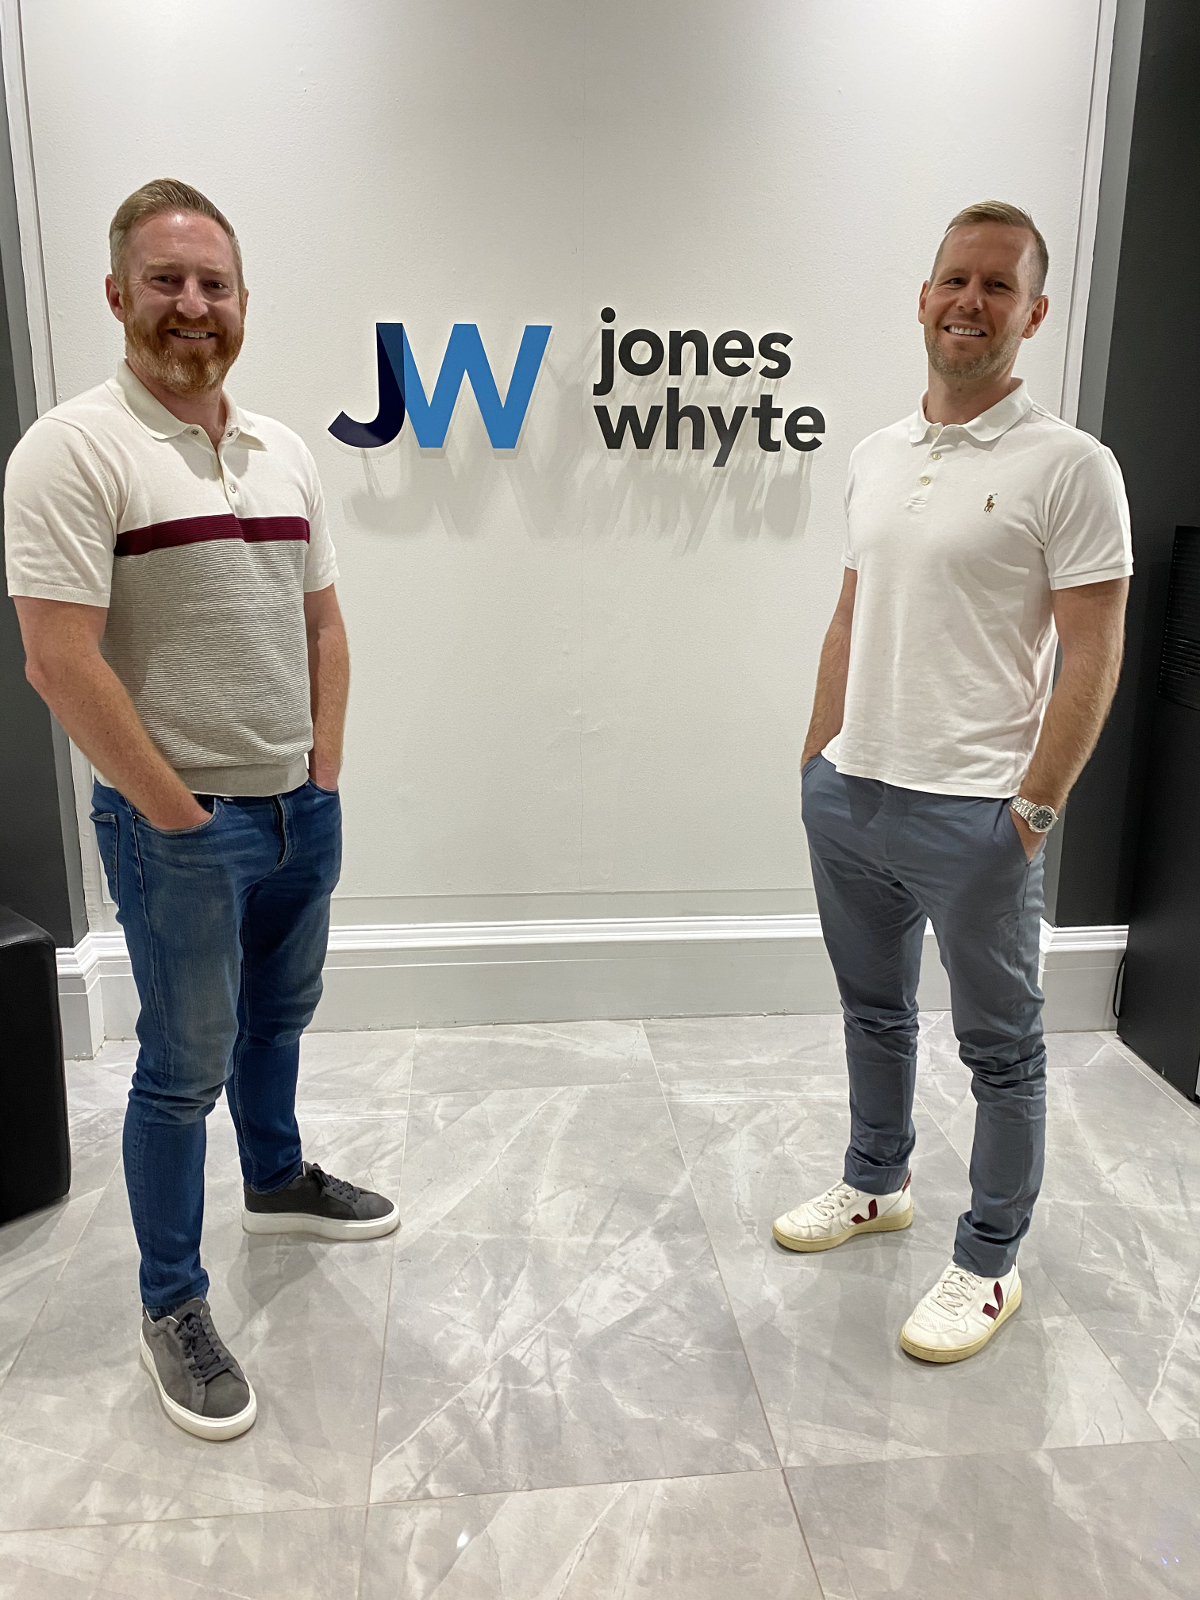 Jones Whyte saves jobs with acquisition of 168-year-old McCLure Solicitors